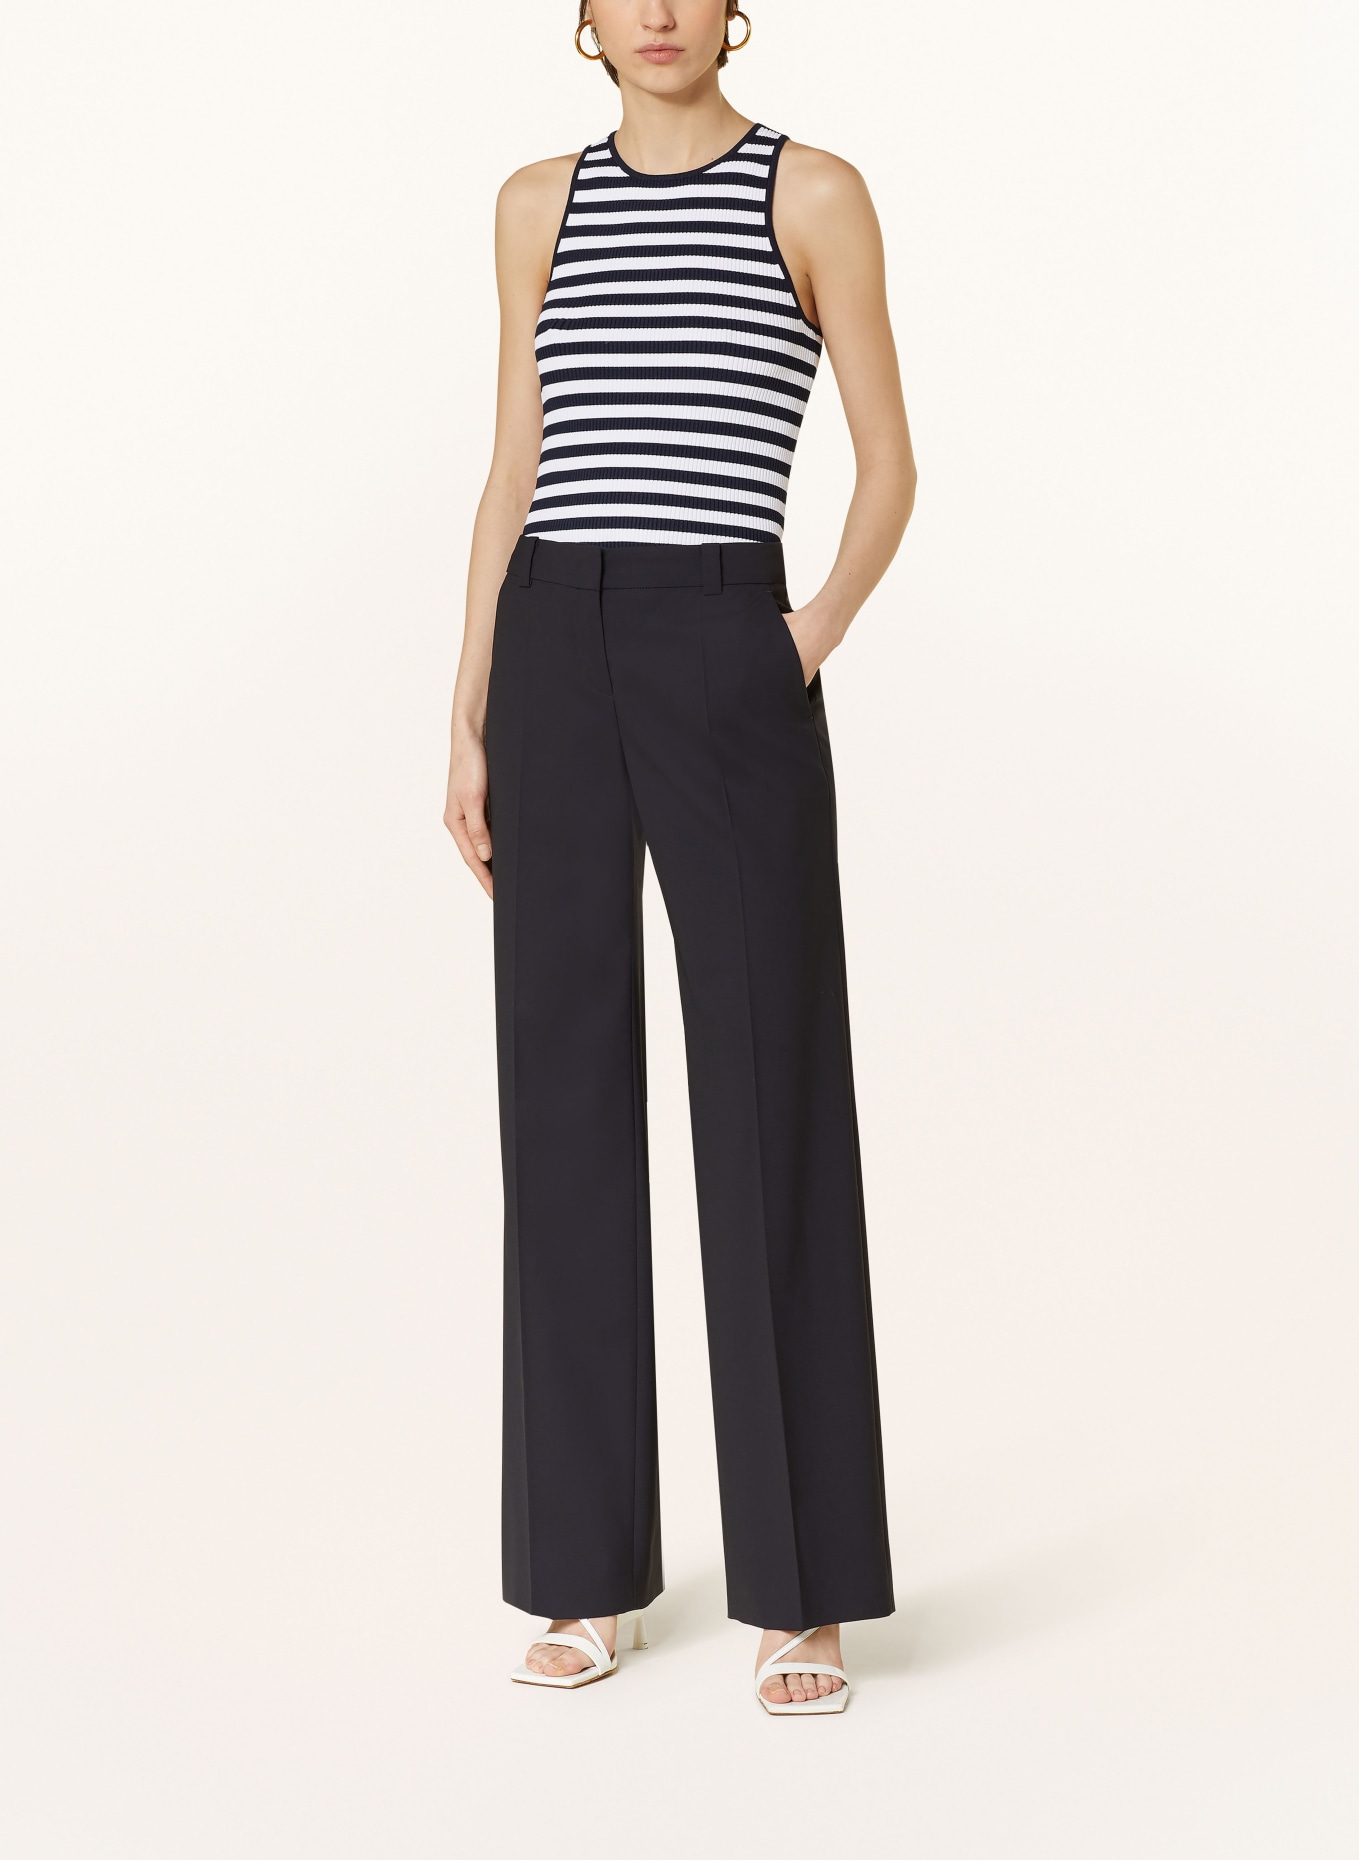 MICHAEL KORS Cropped knit top in dark blue/ white